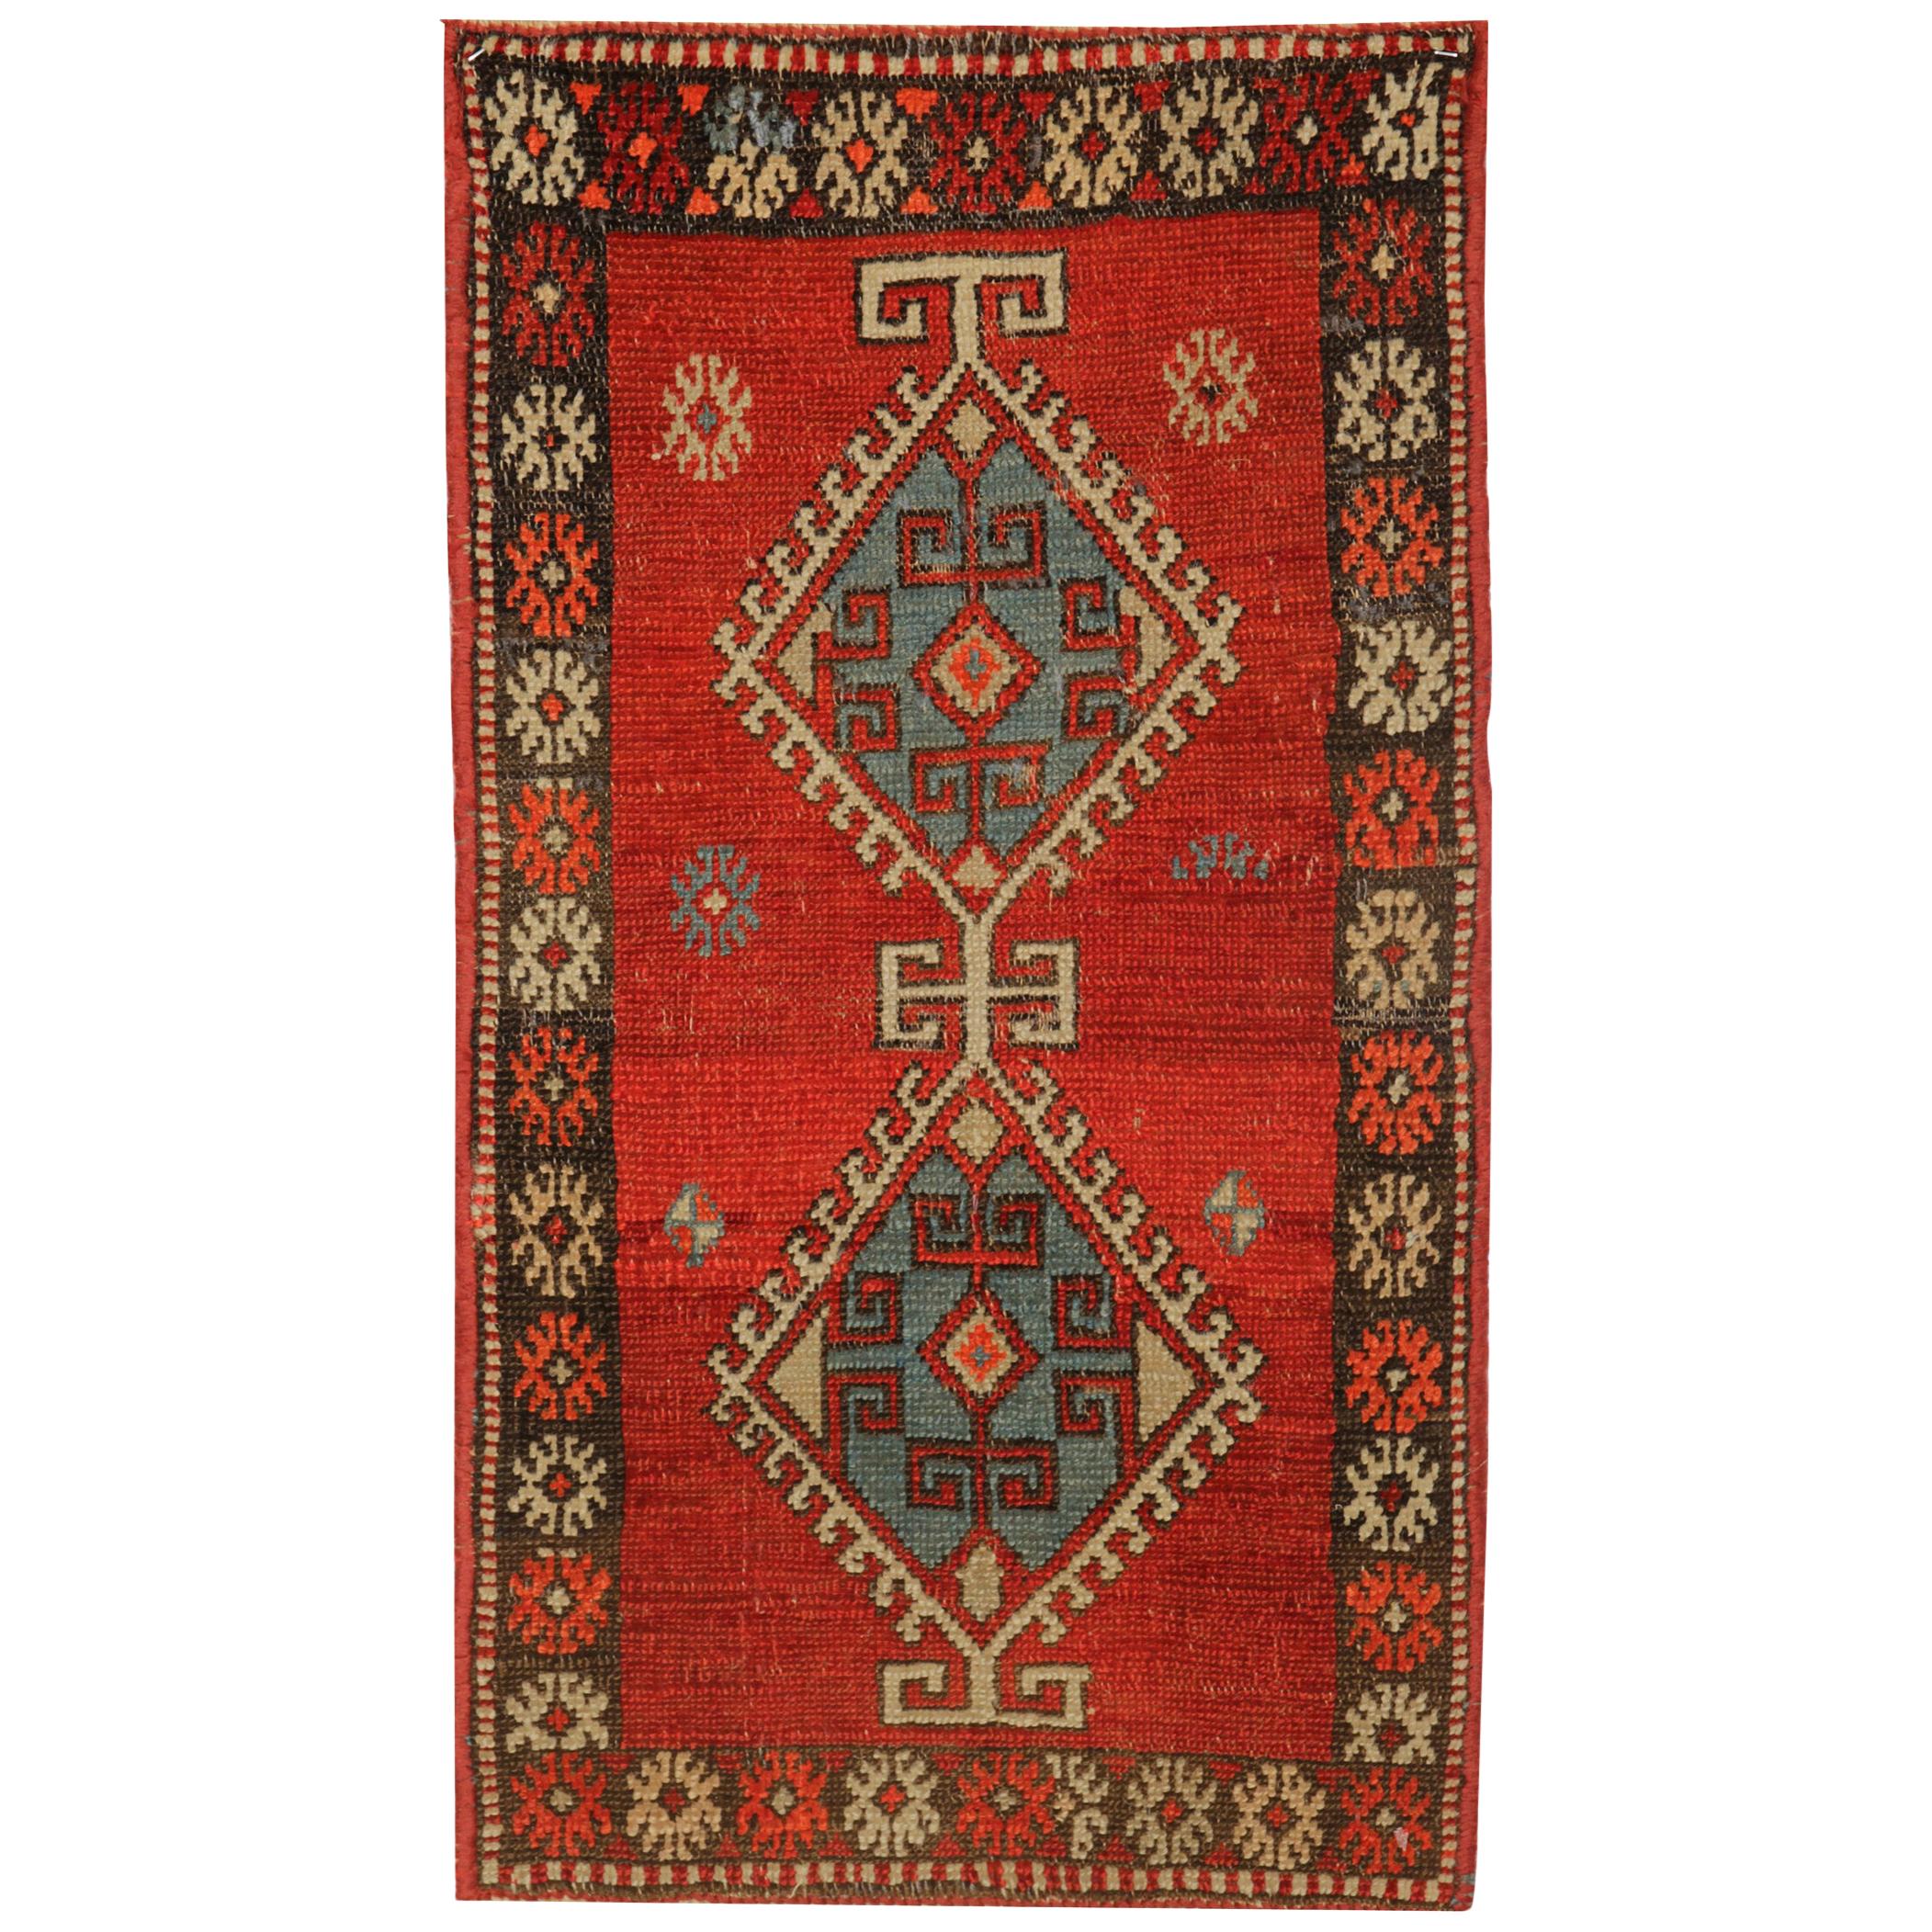 Small Handwoven Antique Rug Caucasian Long Red Wool Carpet